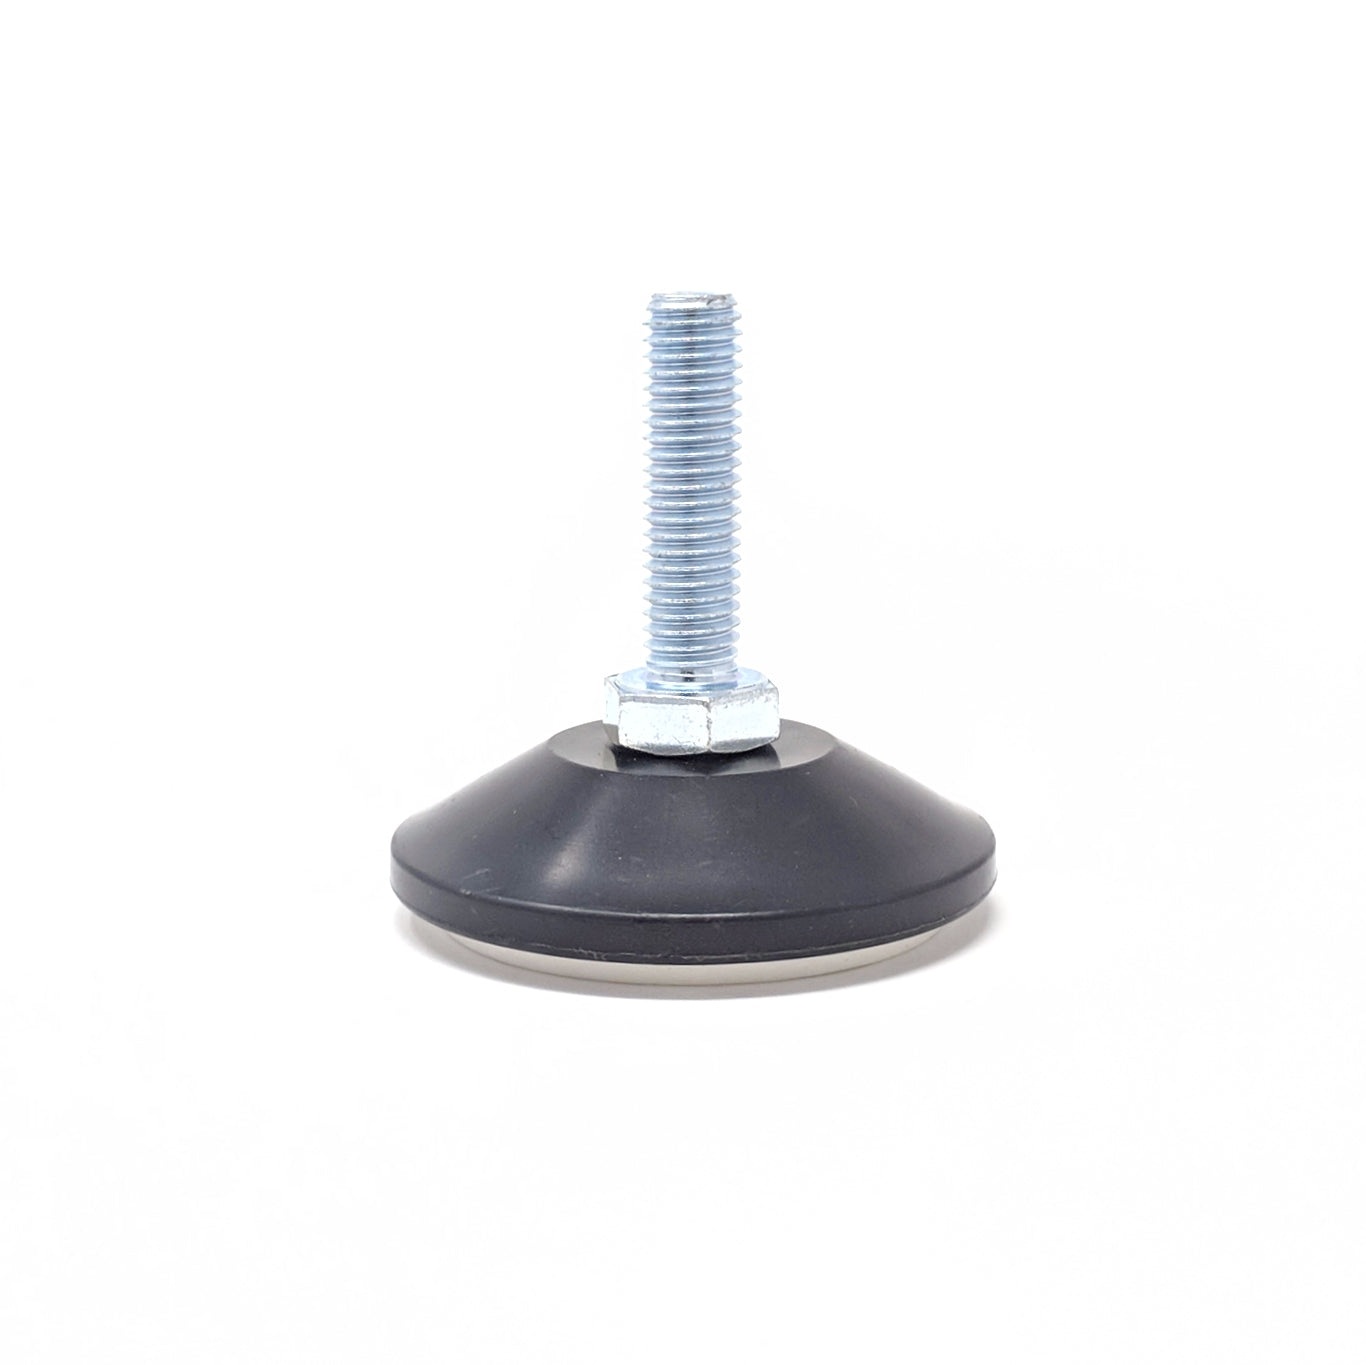 48mm-M8x30mm Non-Slip Screw In Levelling Machine Feet Height Adjustable, Made In Germany - Keay Vital Parts